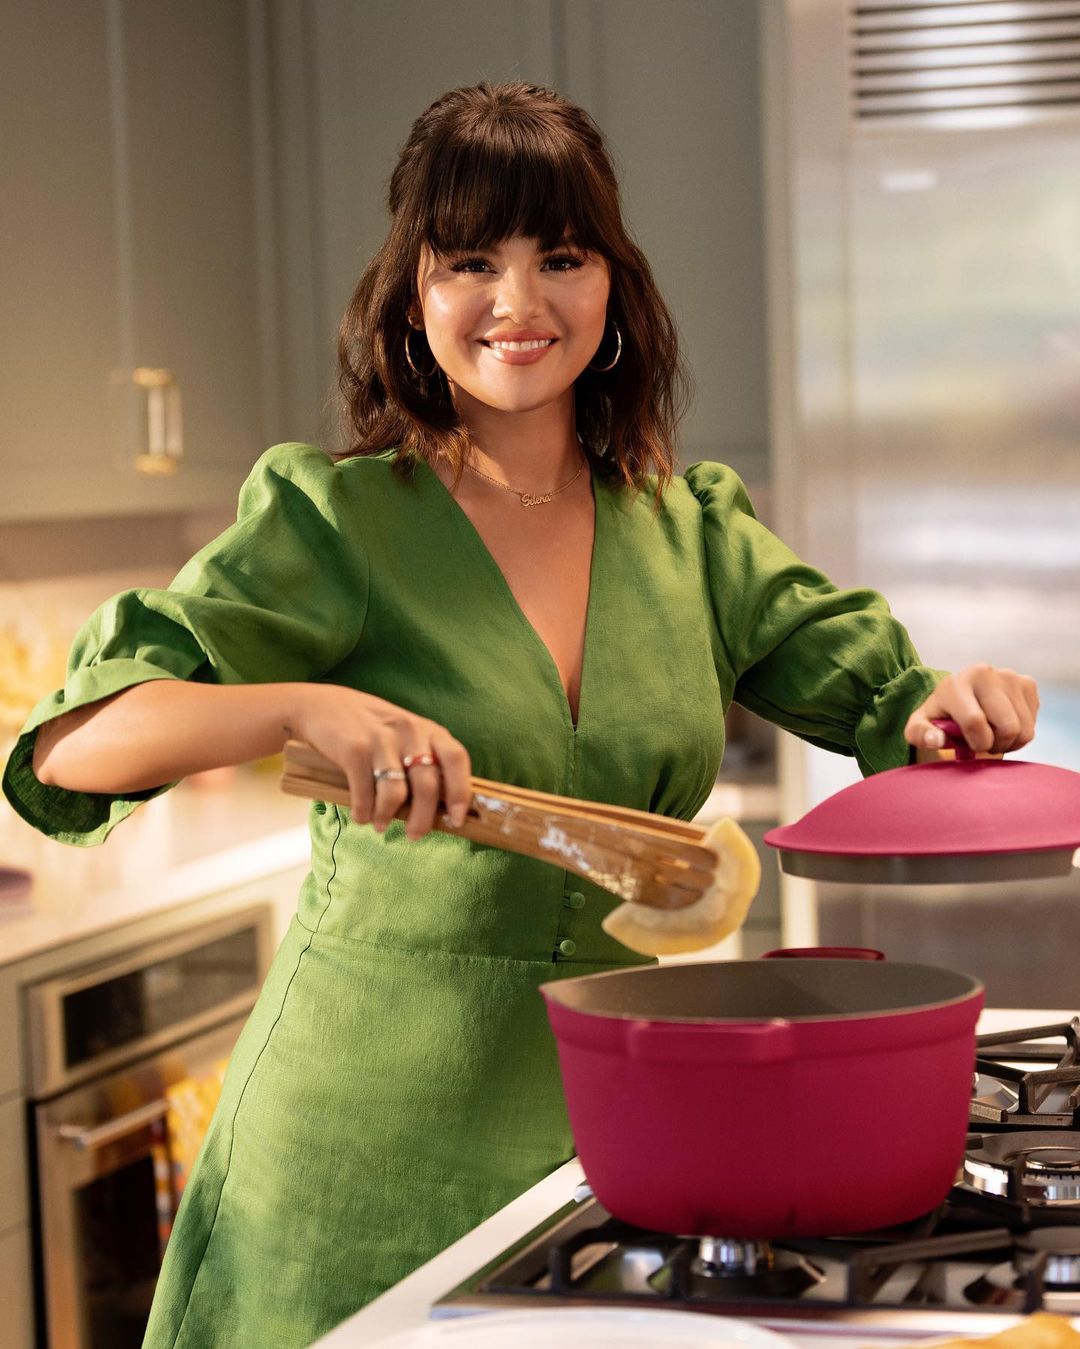 12 Unique Facts About Selena Gomez That Makes Her So SPECIAL- A still from her cooking show